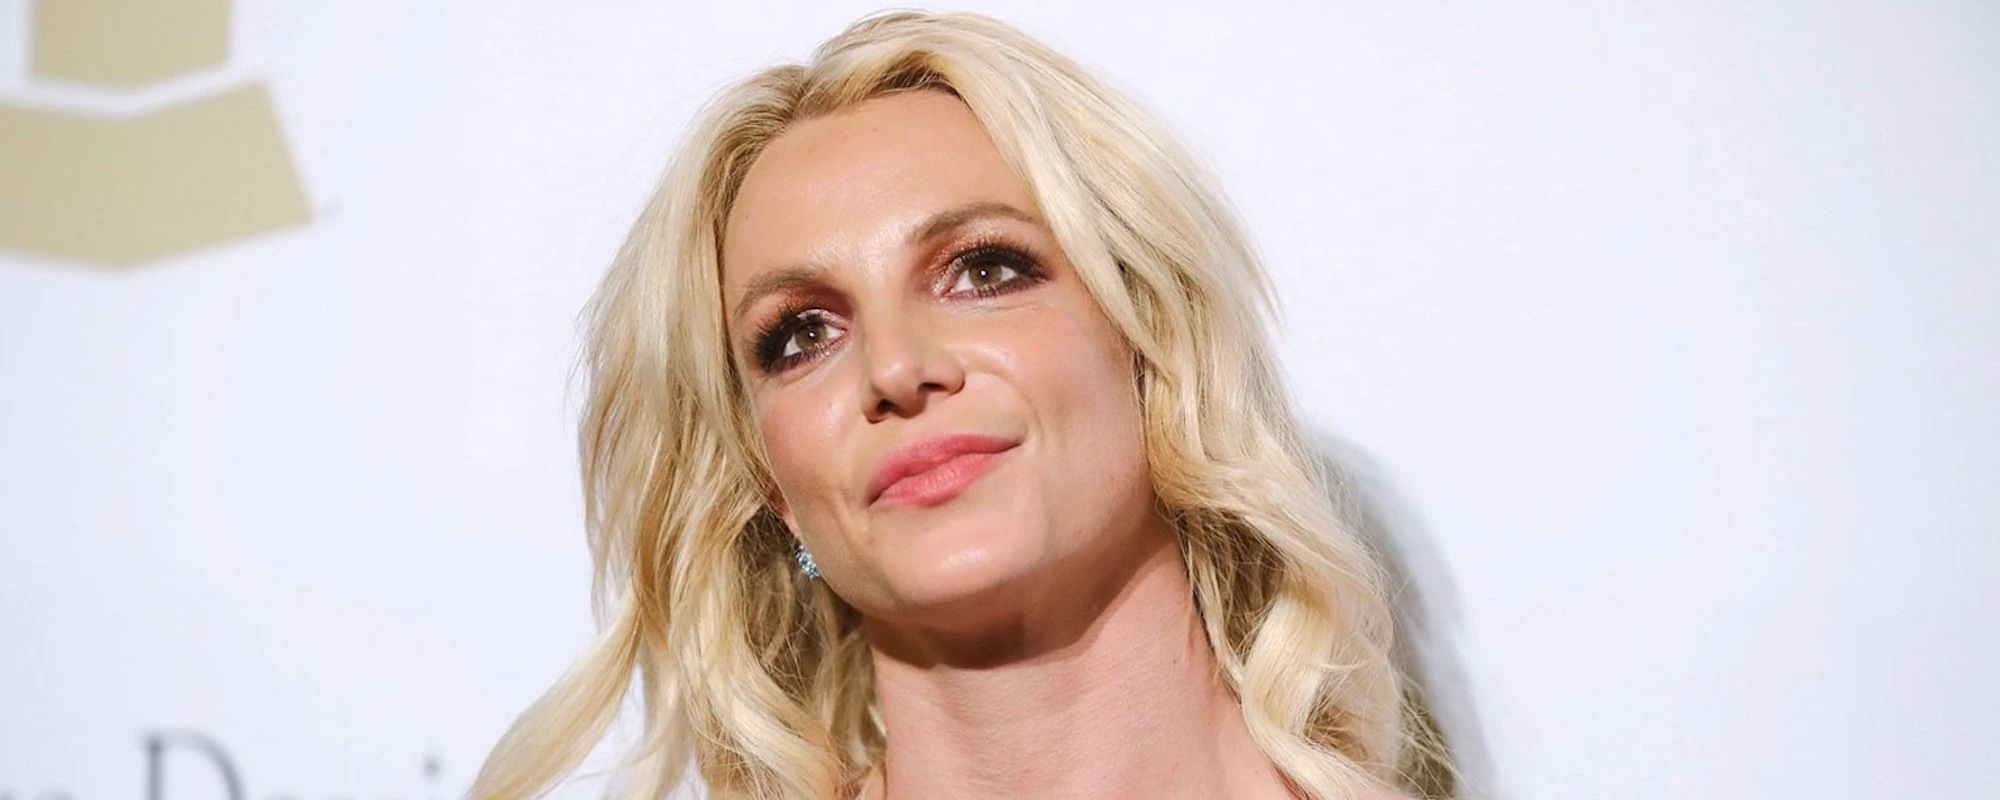 Britney Spears and Elton John to Team Up For a Duet of “Tiny Dancer”